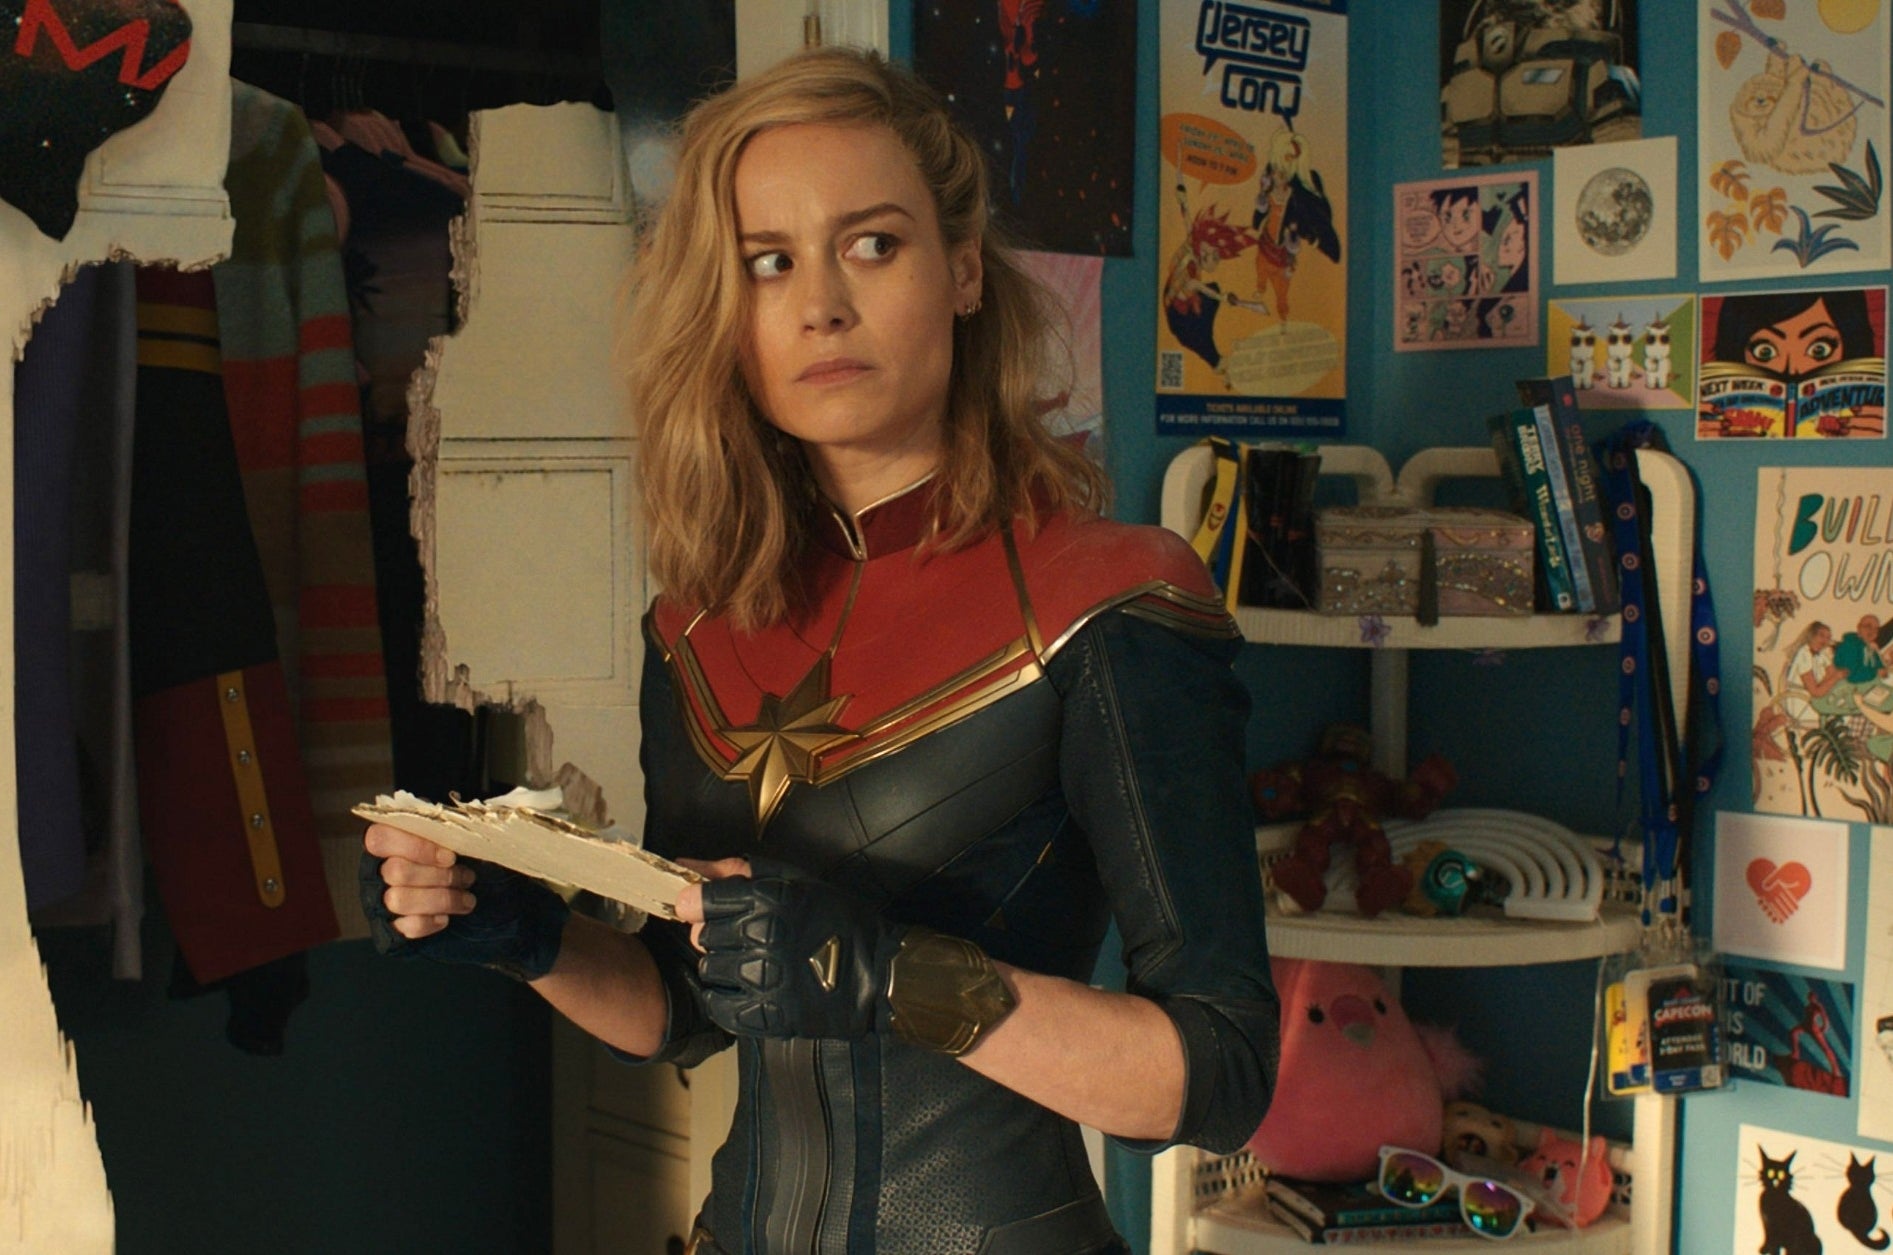 Carol Danvers in a room with vibrant posters, looking pensive while holding a slice of pie